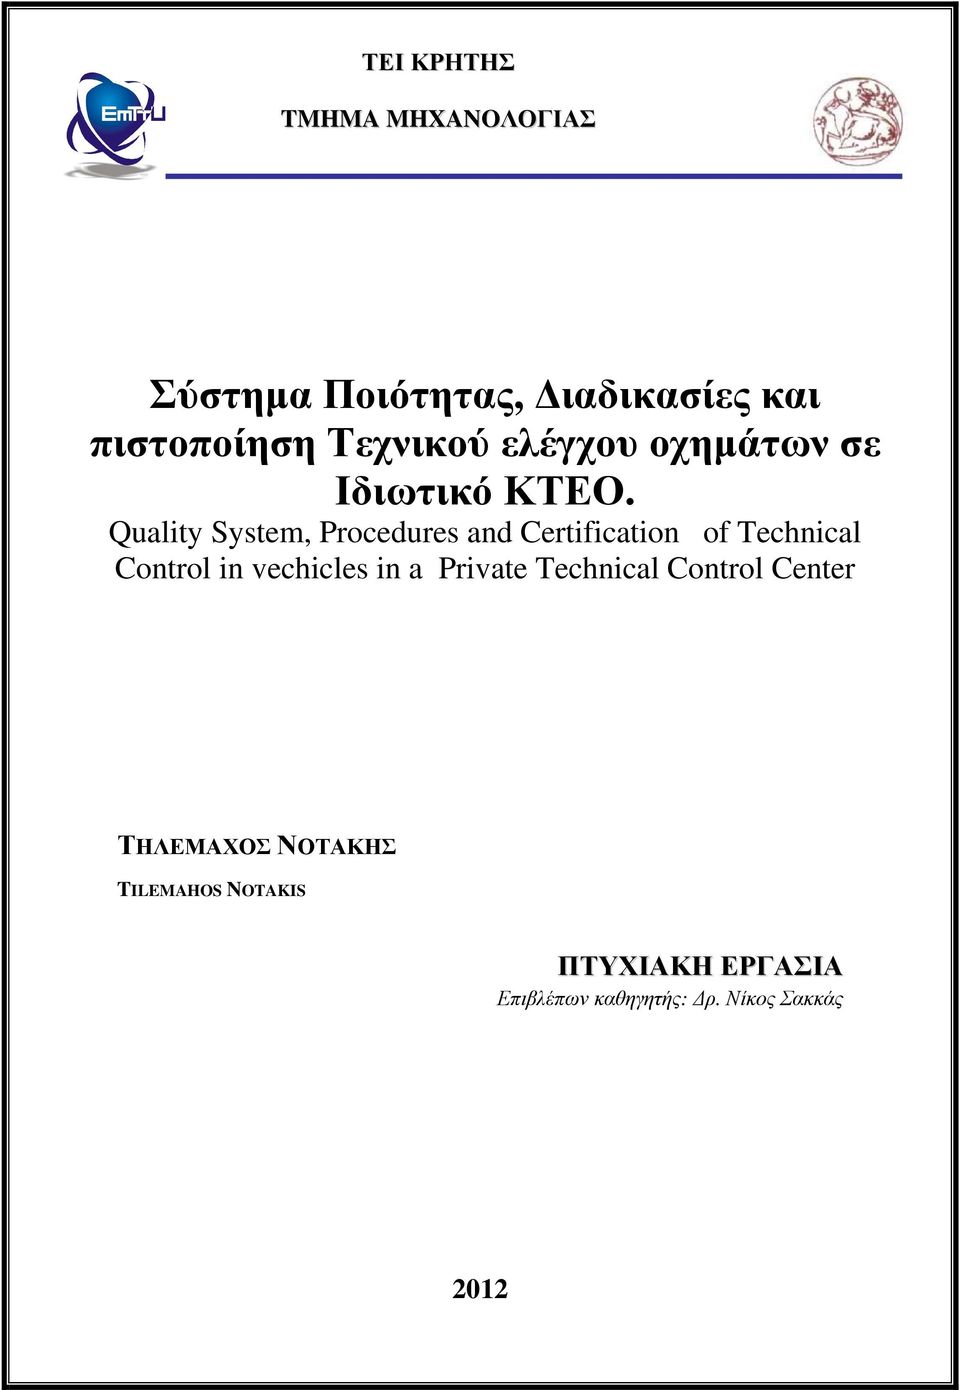 Quality System, Procedures and Certification of Technical Control in vechicles in